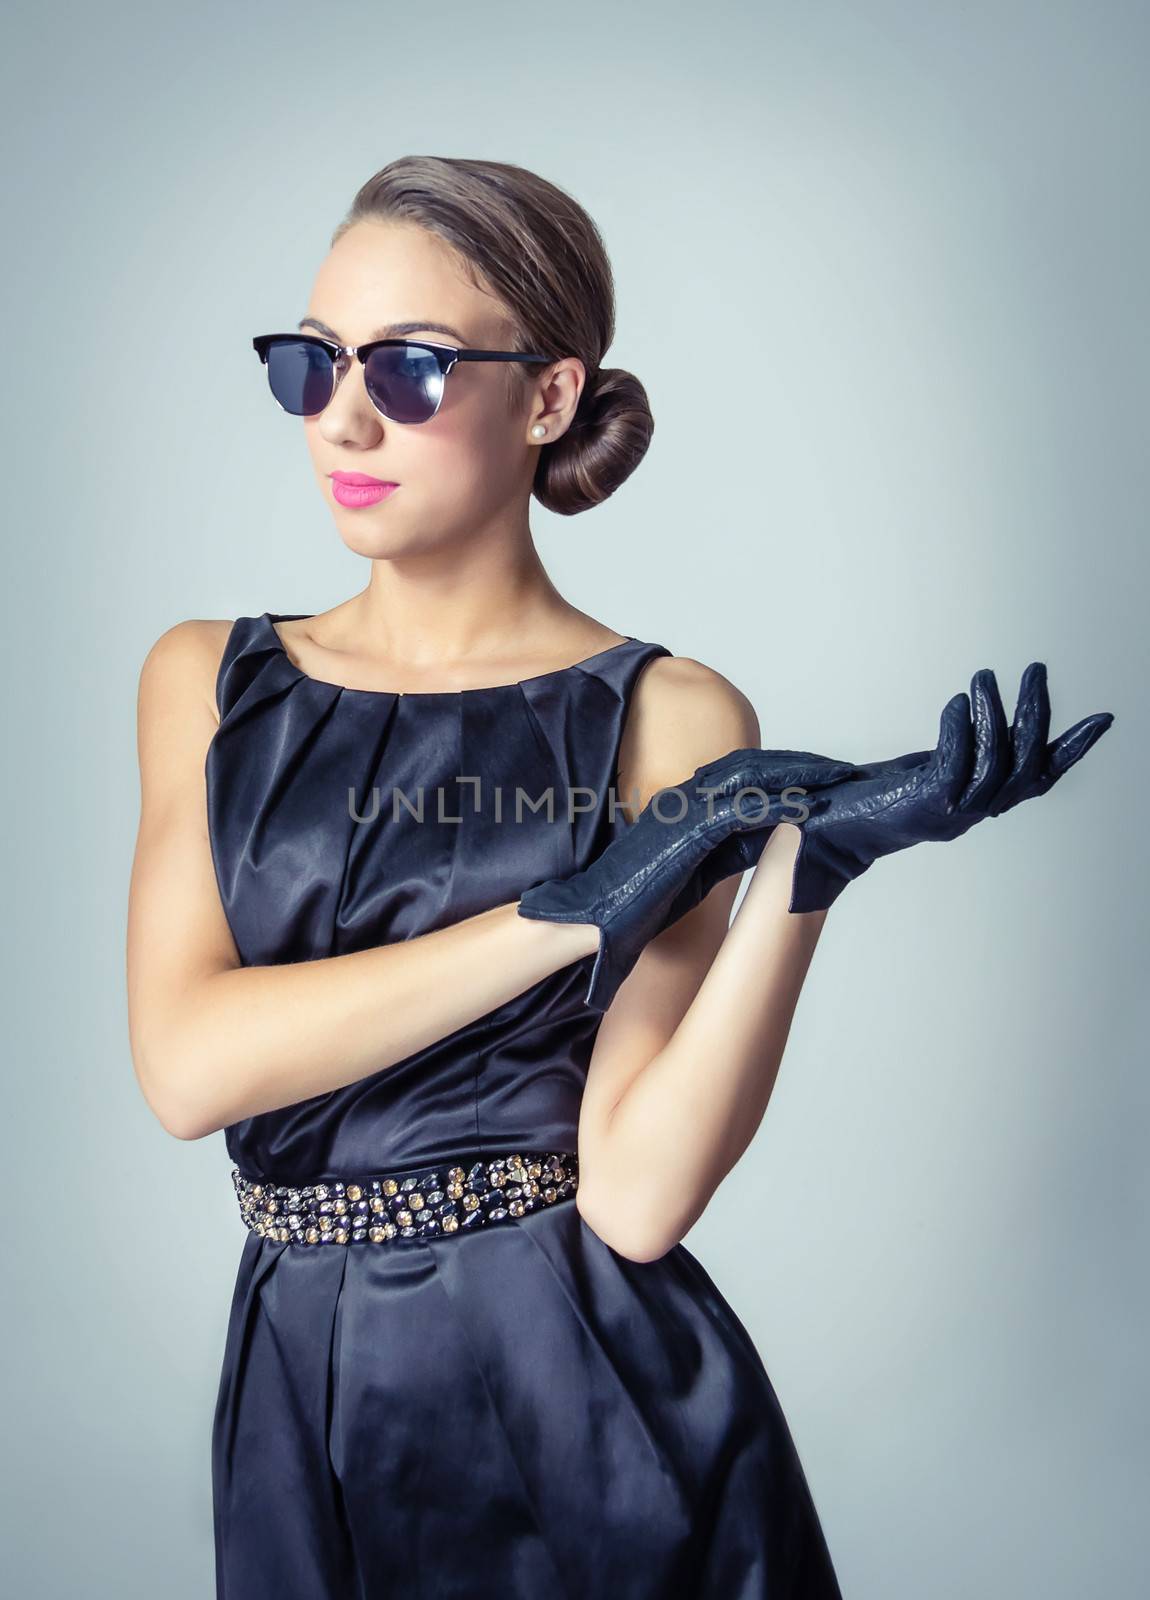 Fashion portrait of beautiful young girl with sunglasses in classic vintage style